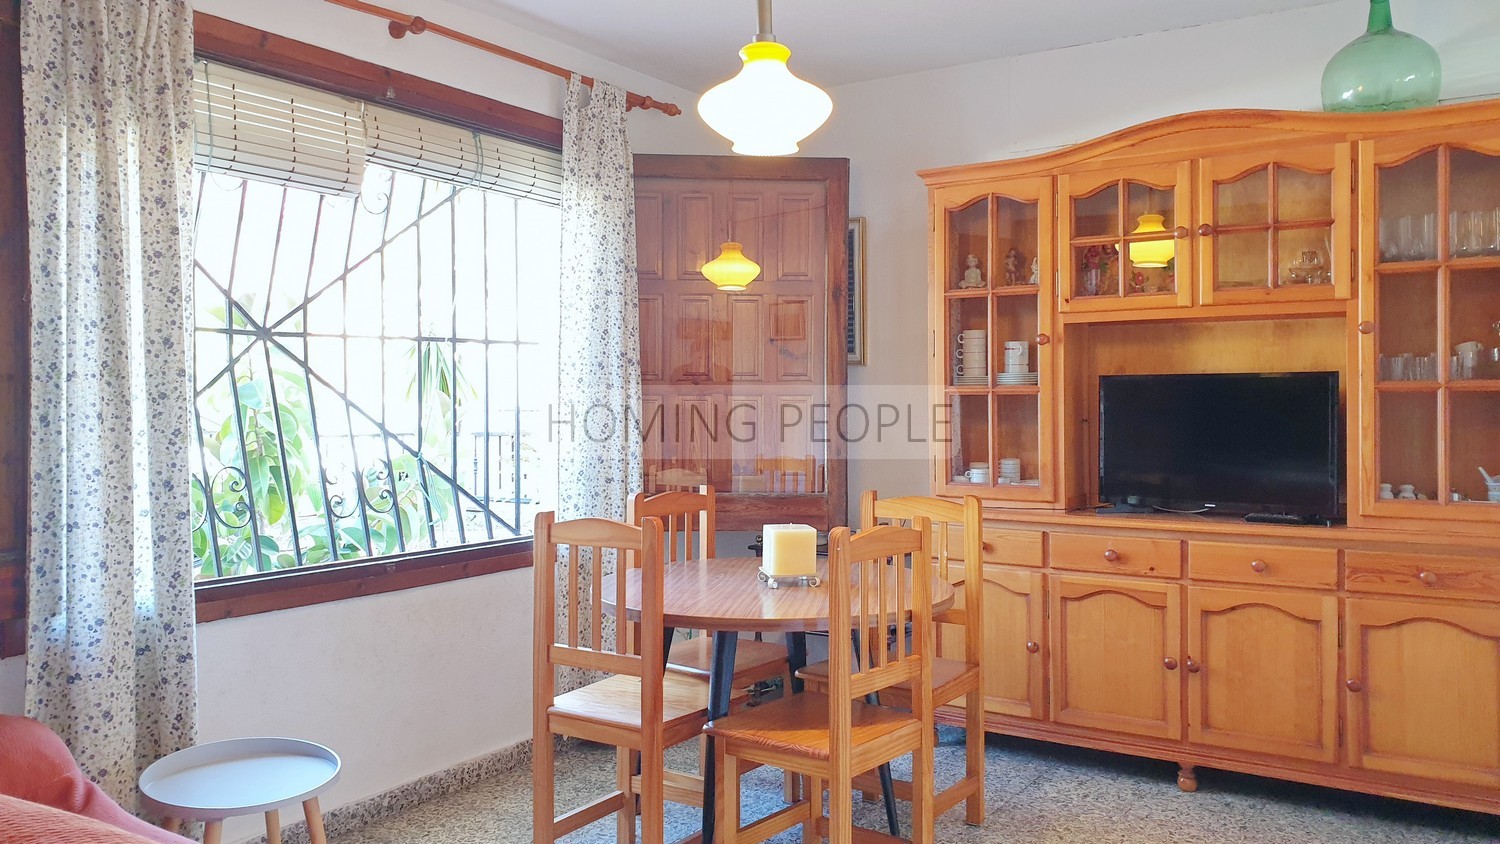 East/West oriented apartment, close to all amenities